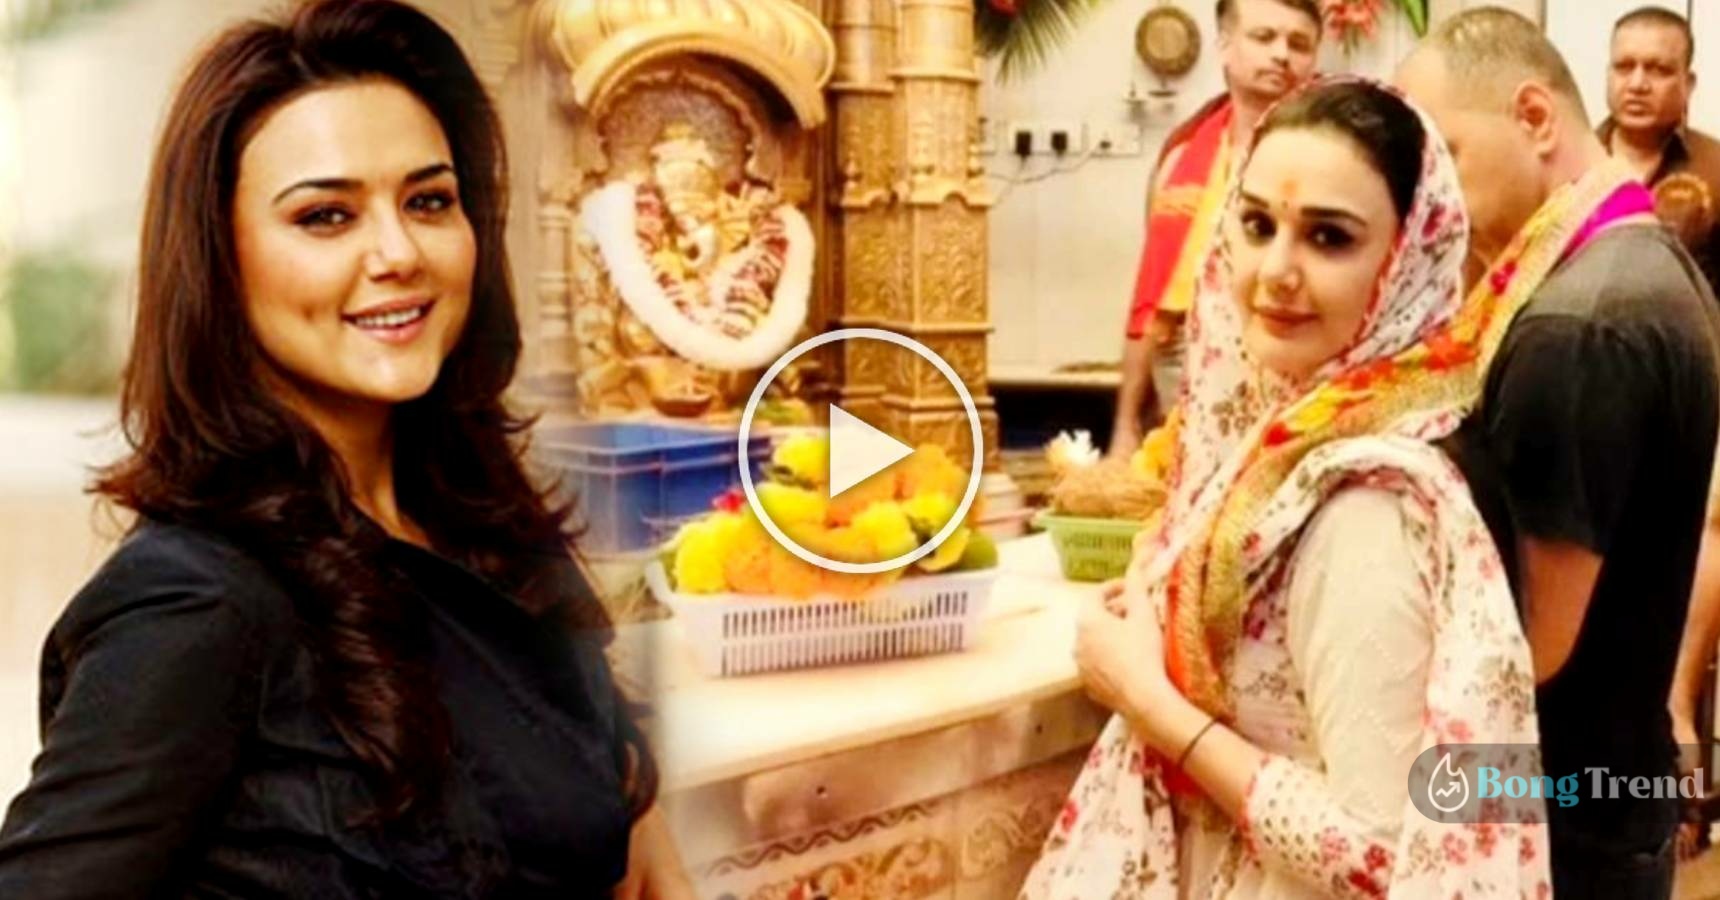 Bollywood actress Preity Zinta goes to Siddhivinayak Temple